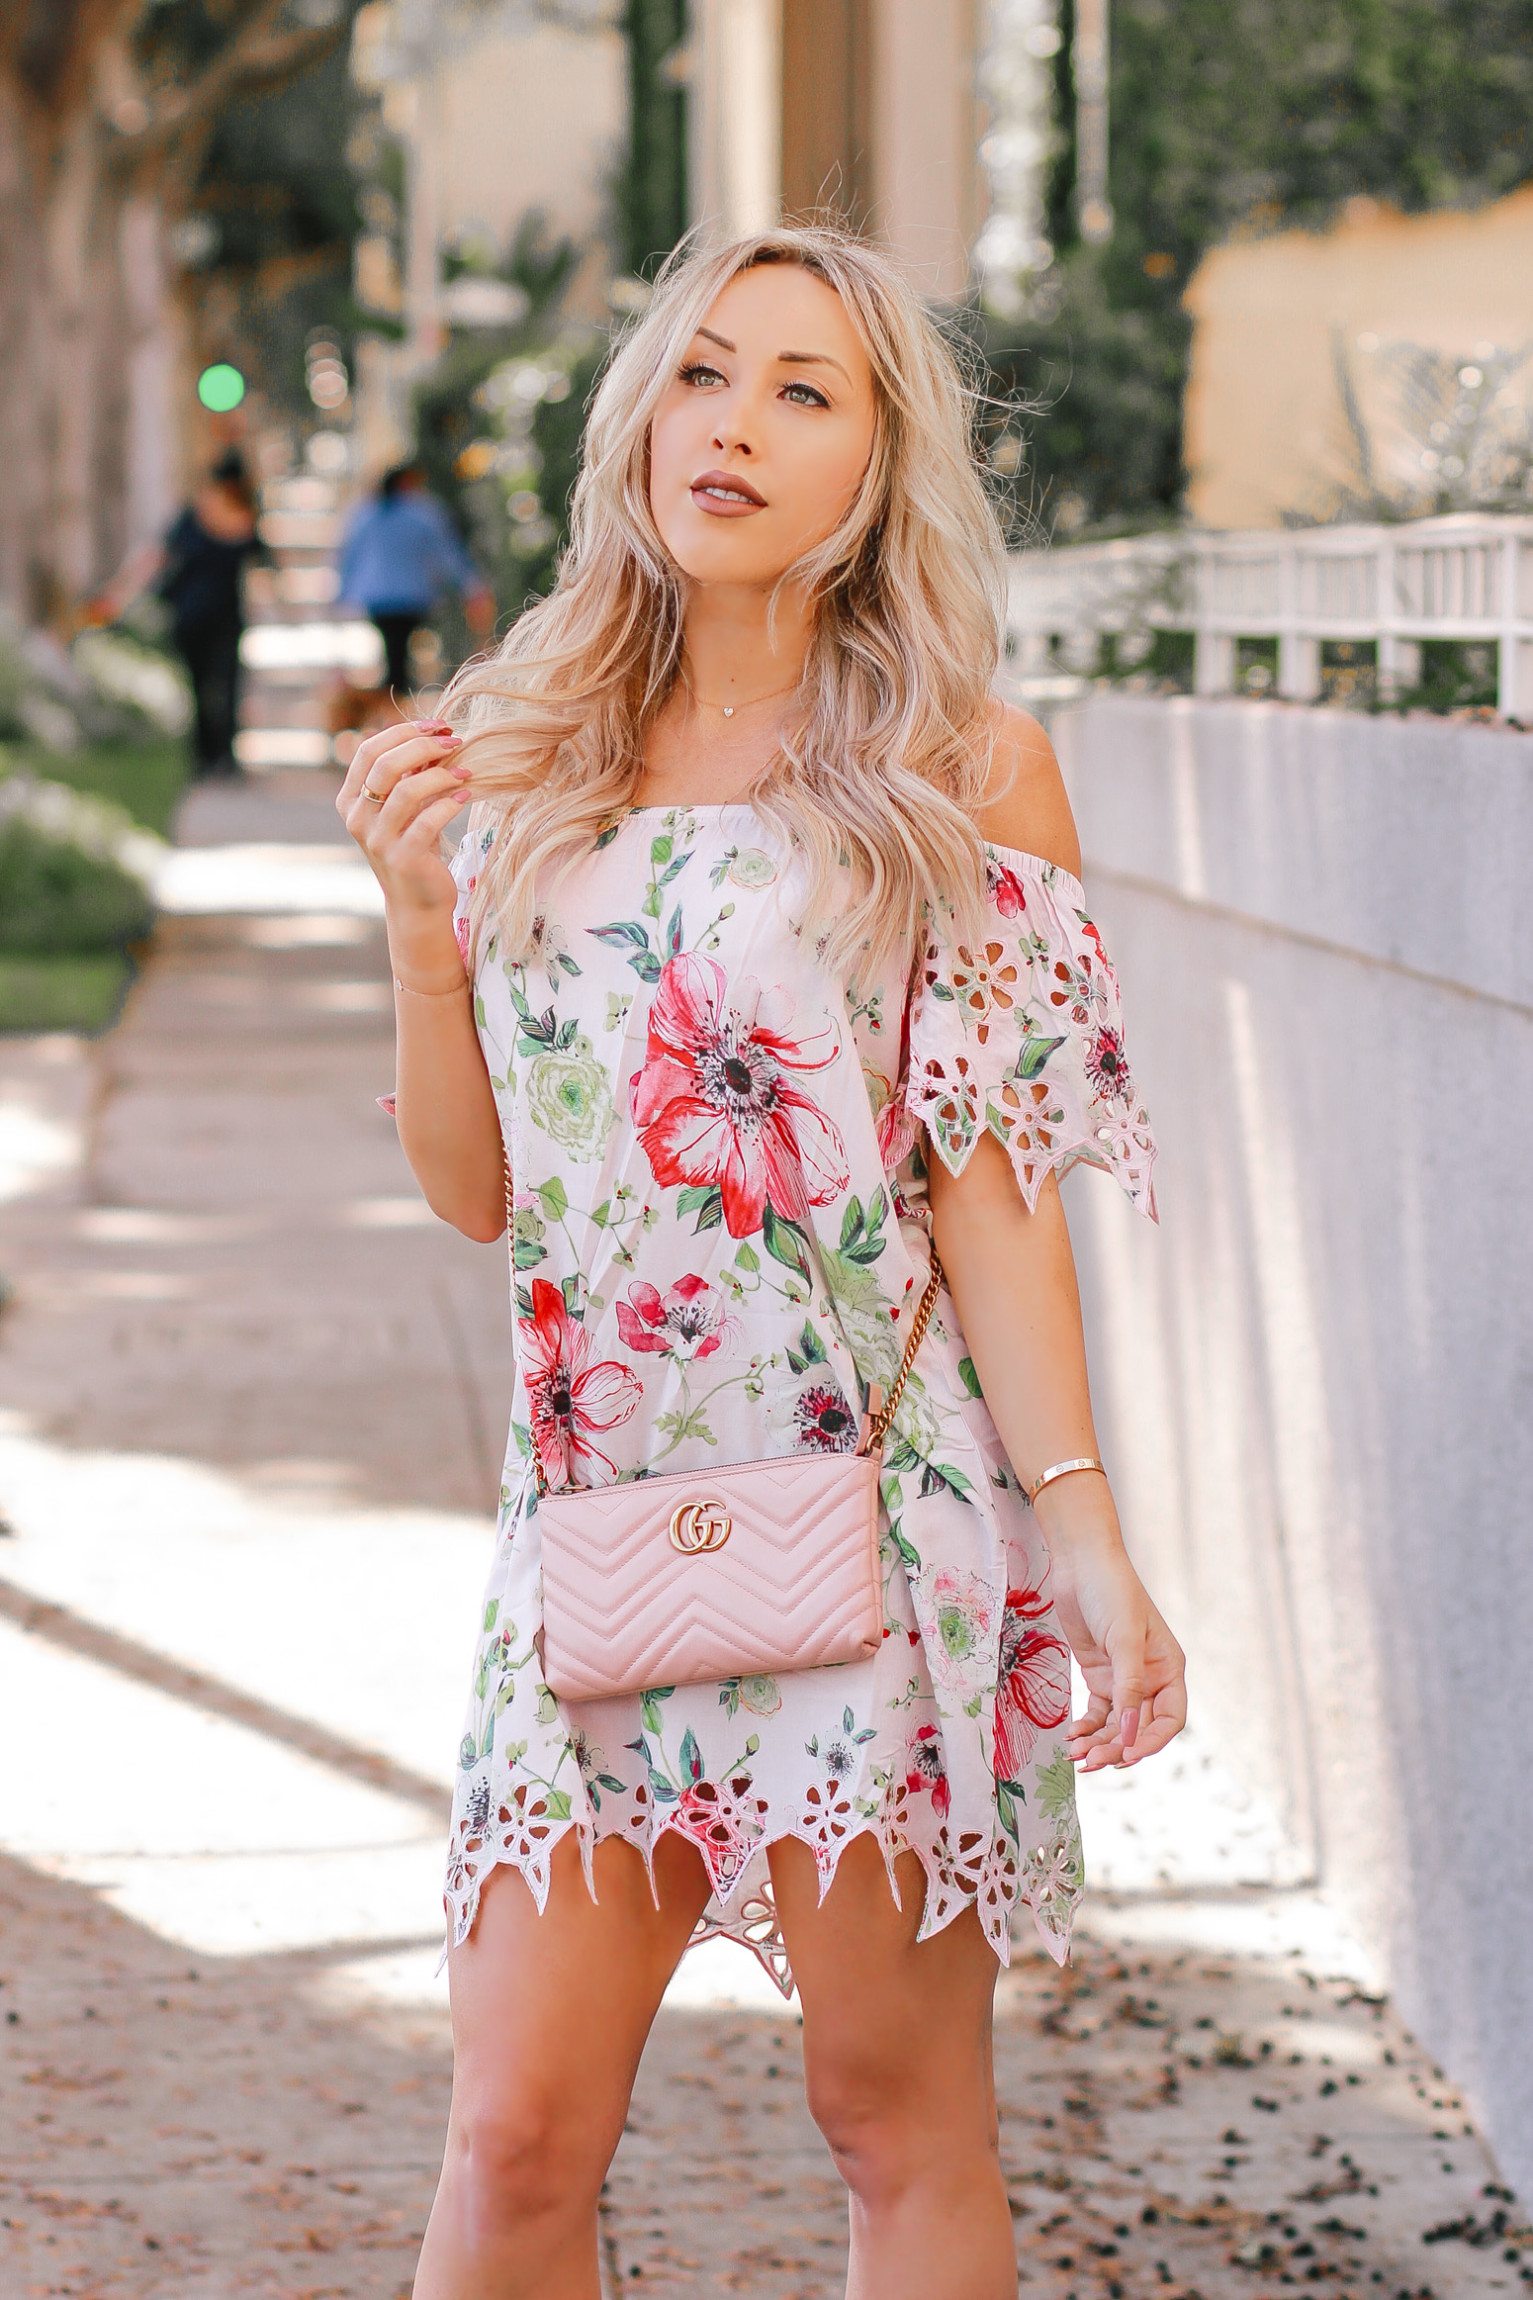 The Prettiest Spring Dress | Pink Floral Dress | Spring Fashion | Pink Gucci Bag | Blondie in the City by Hayley Larue